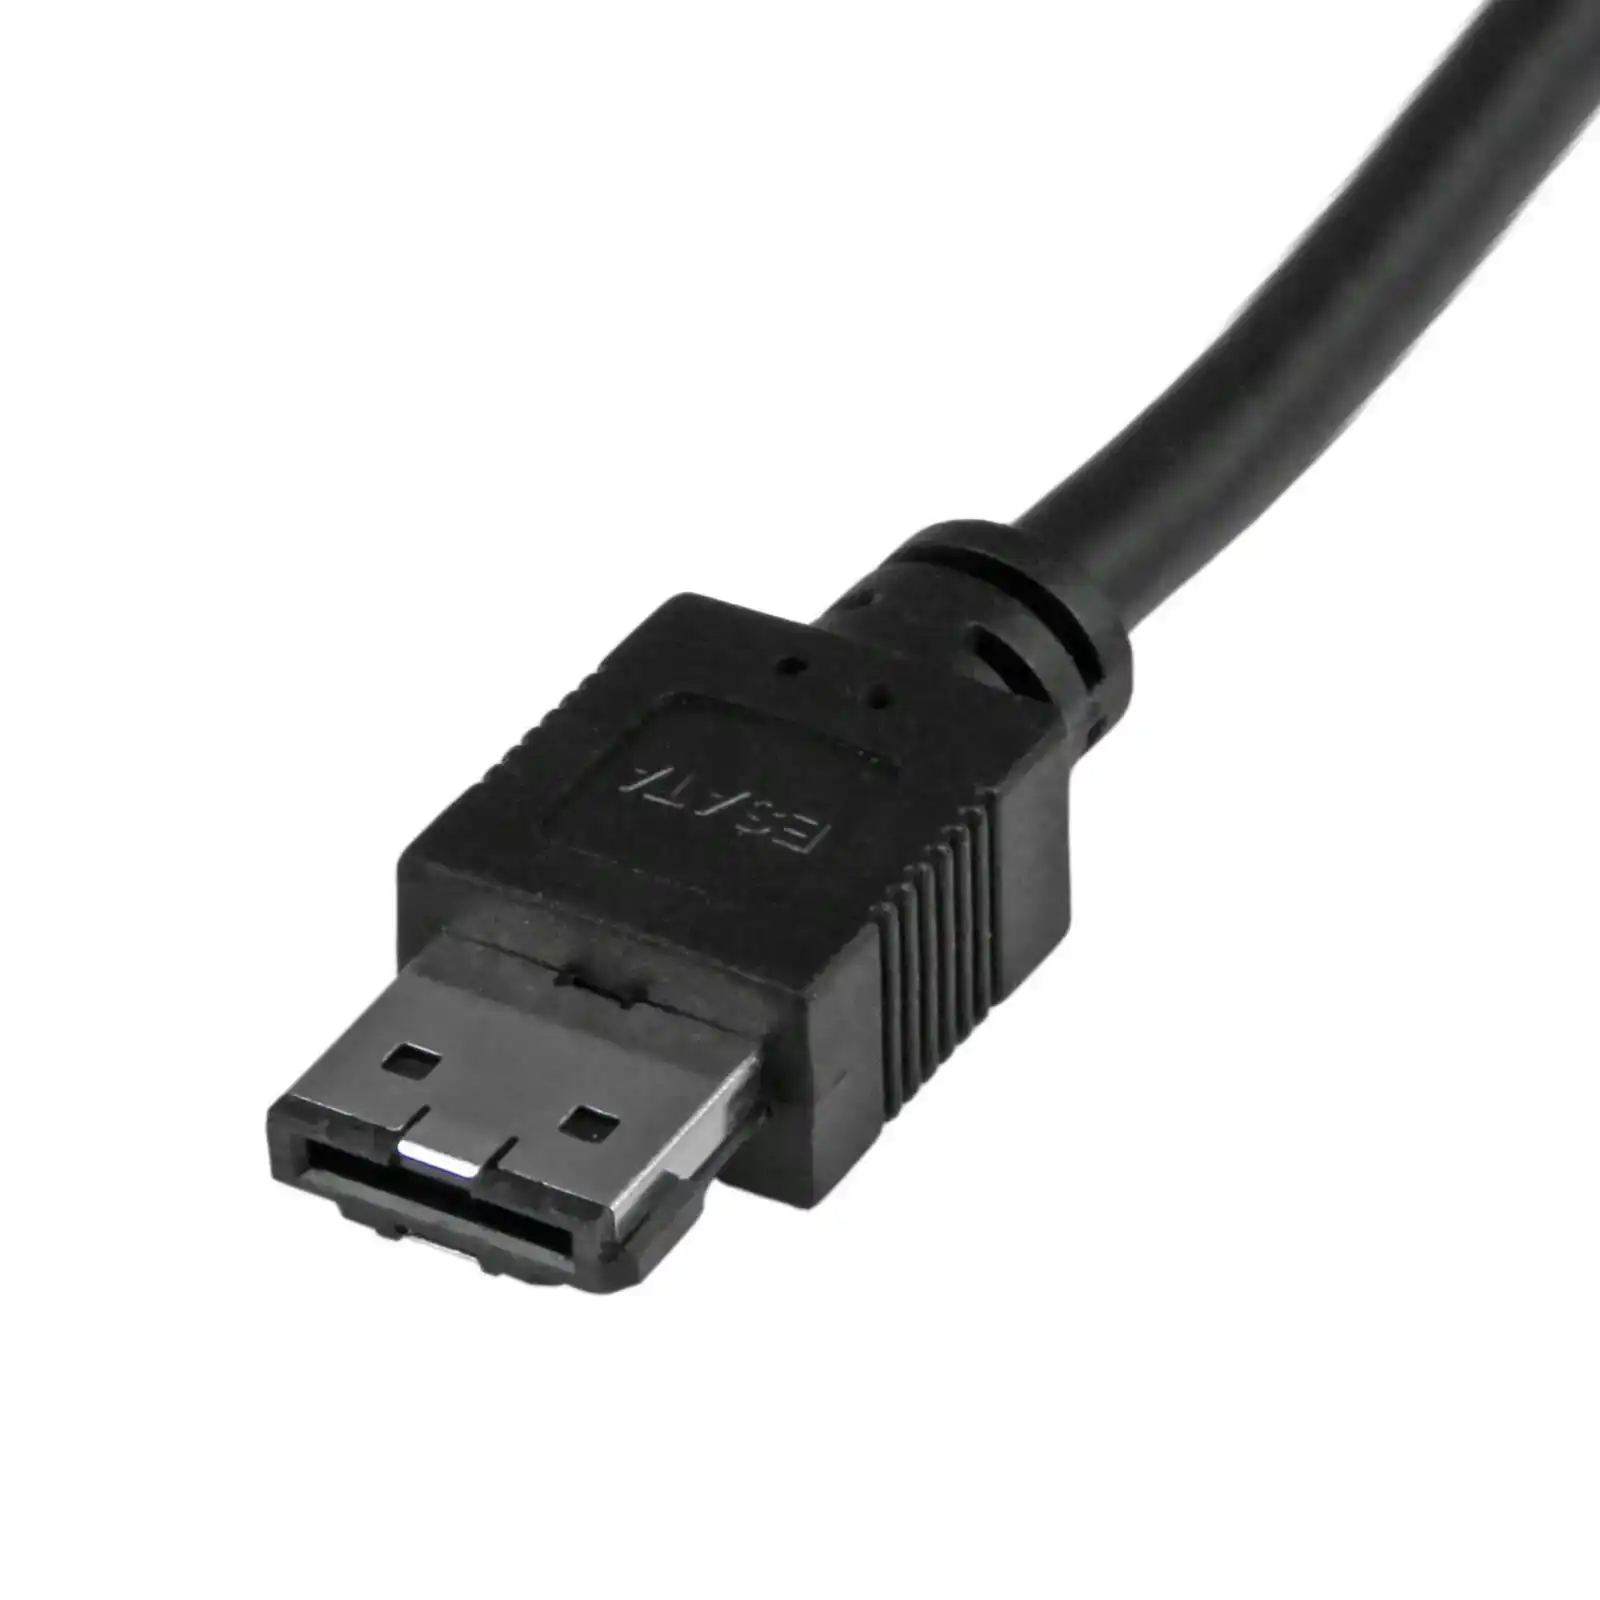 Star Tech 6Gbps USB 3.0 to eSATA Adapter 3ft Cable for SSD/HDD/ODD Stroage Drive